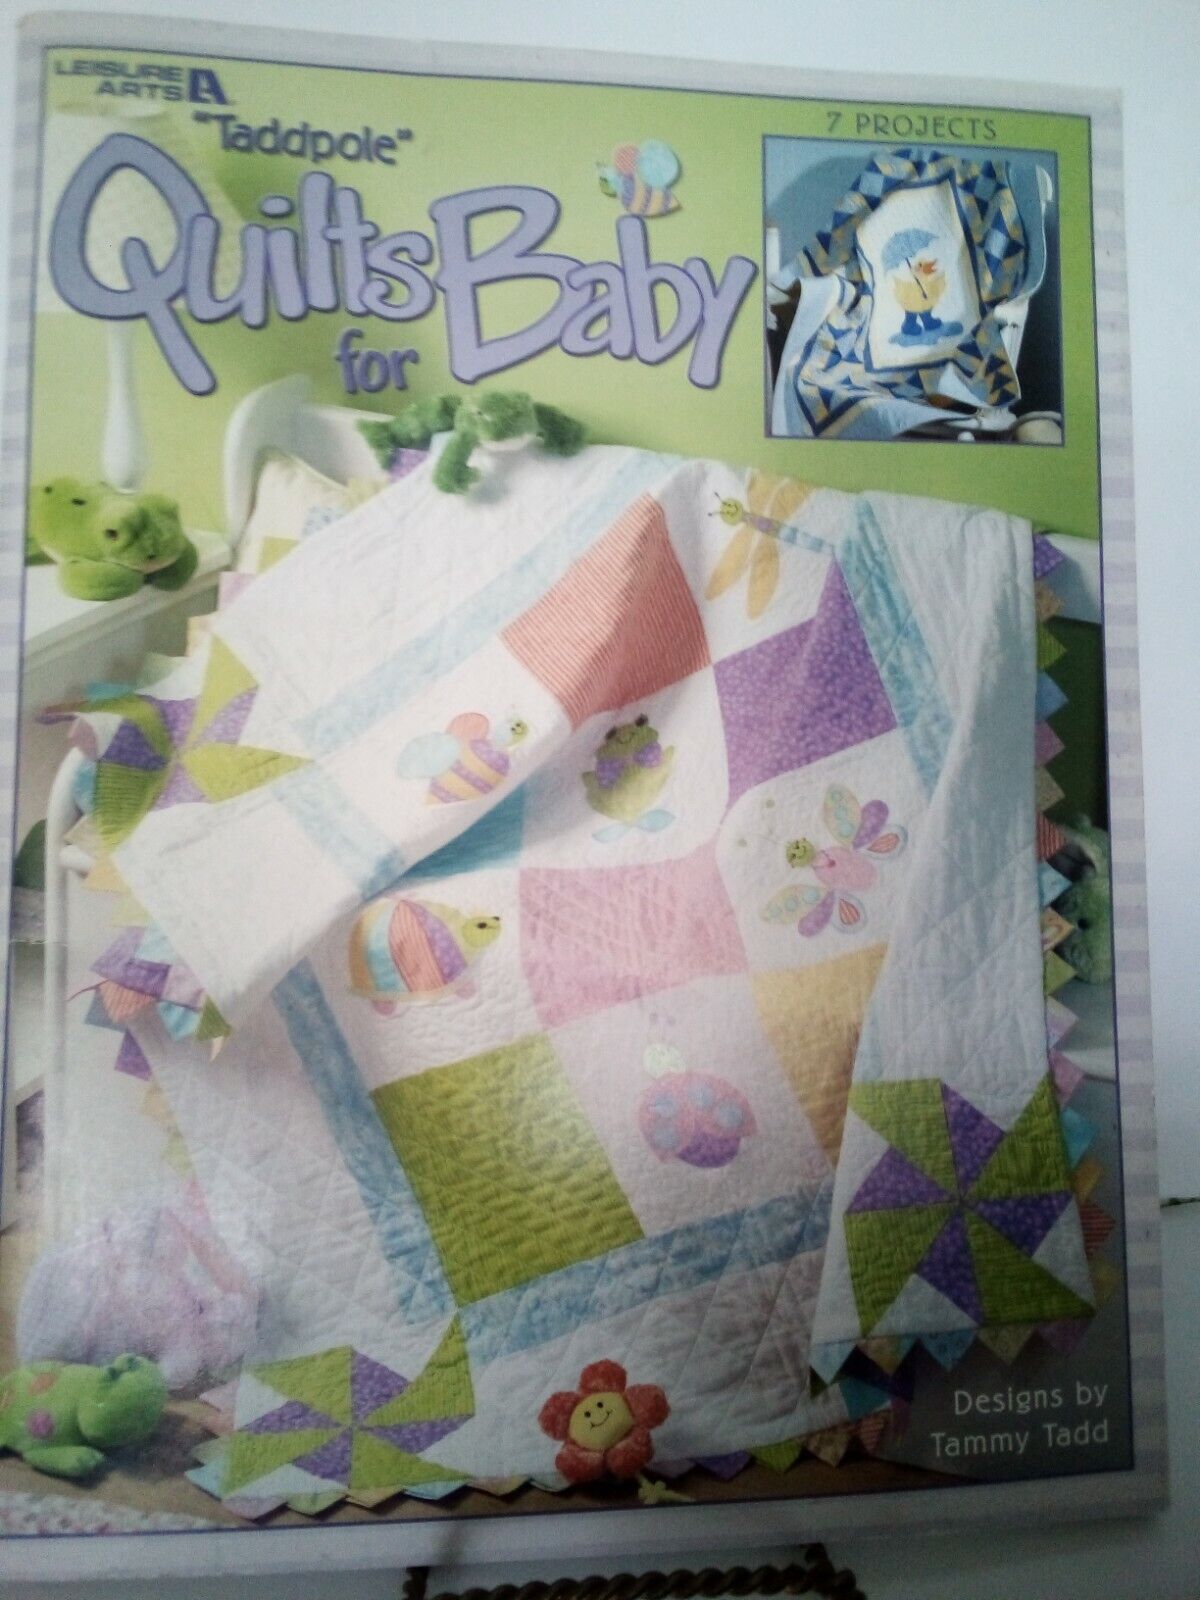 Lot of 2 Baby Quilting Books ~ More Quilts for Baby & Taddpole Quilts for Baby Patchwork Place & Leisure Arts - фотография #4